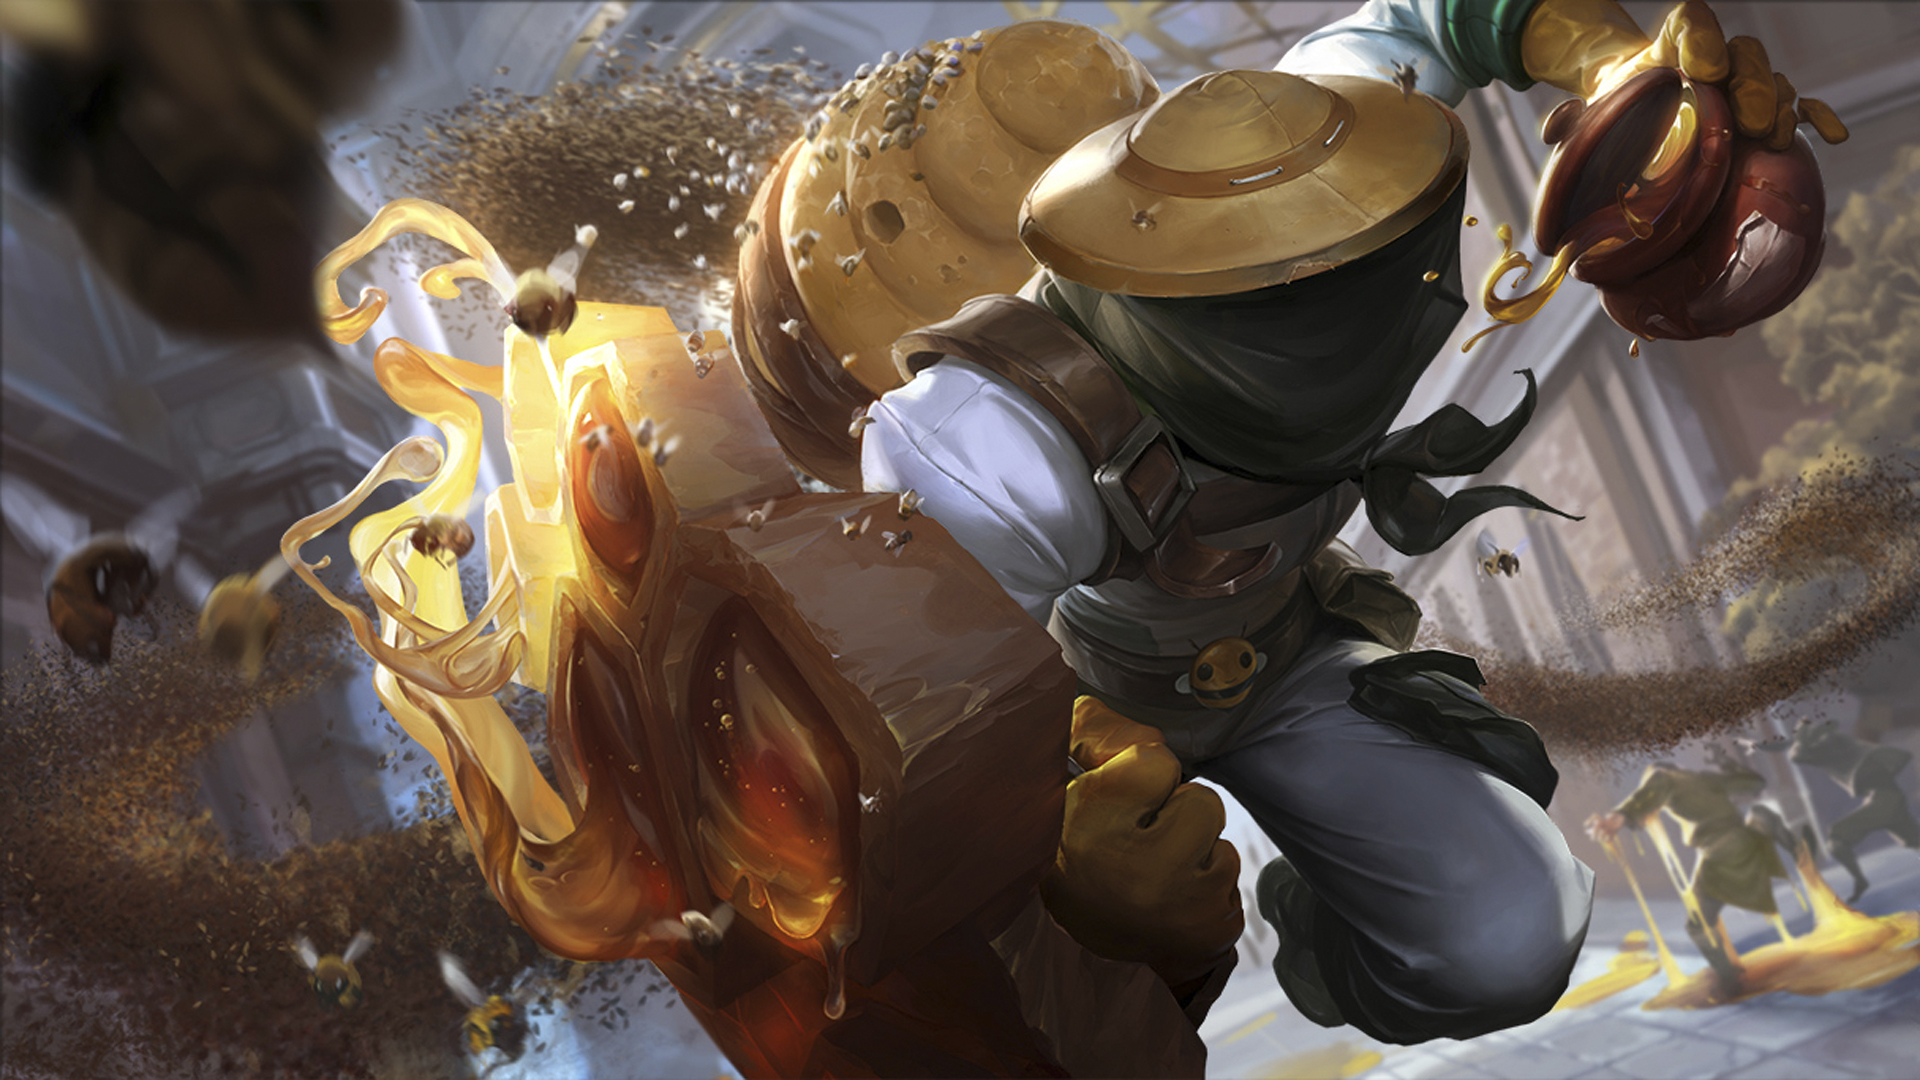 Singed League Of Legends Wallpapers